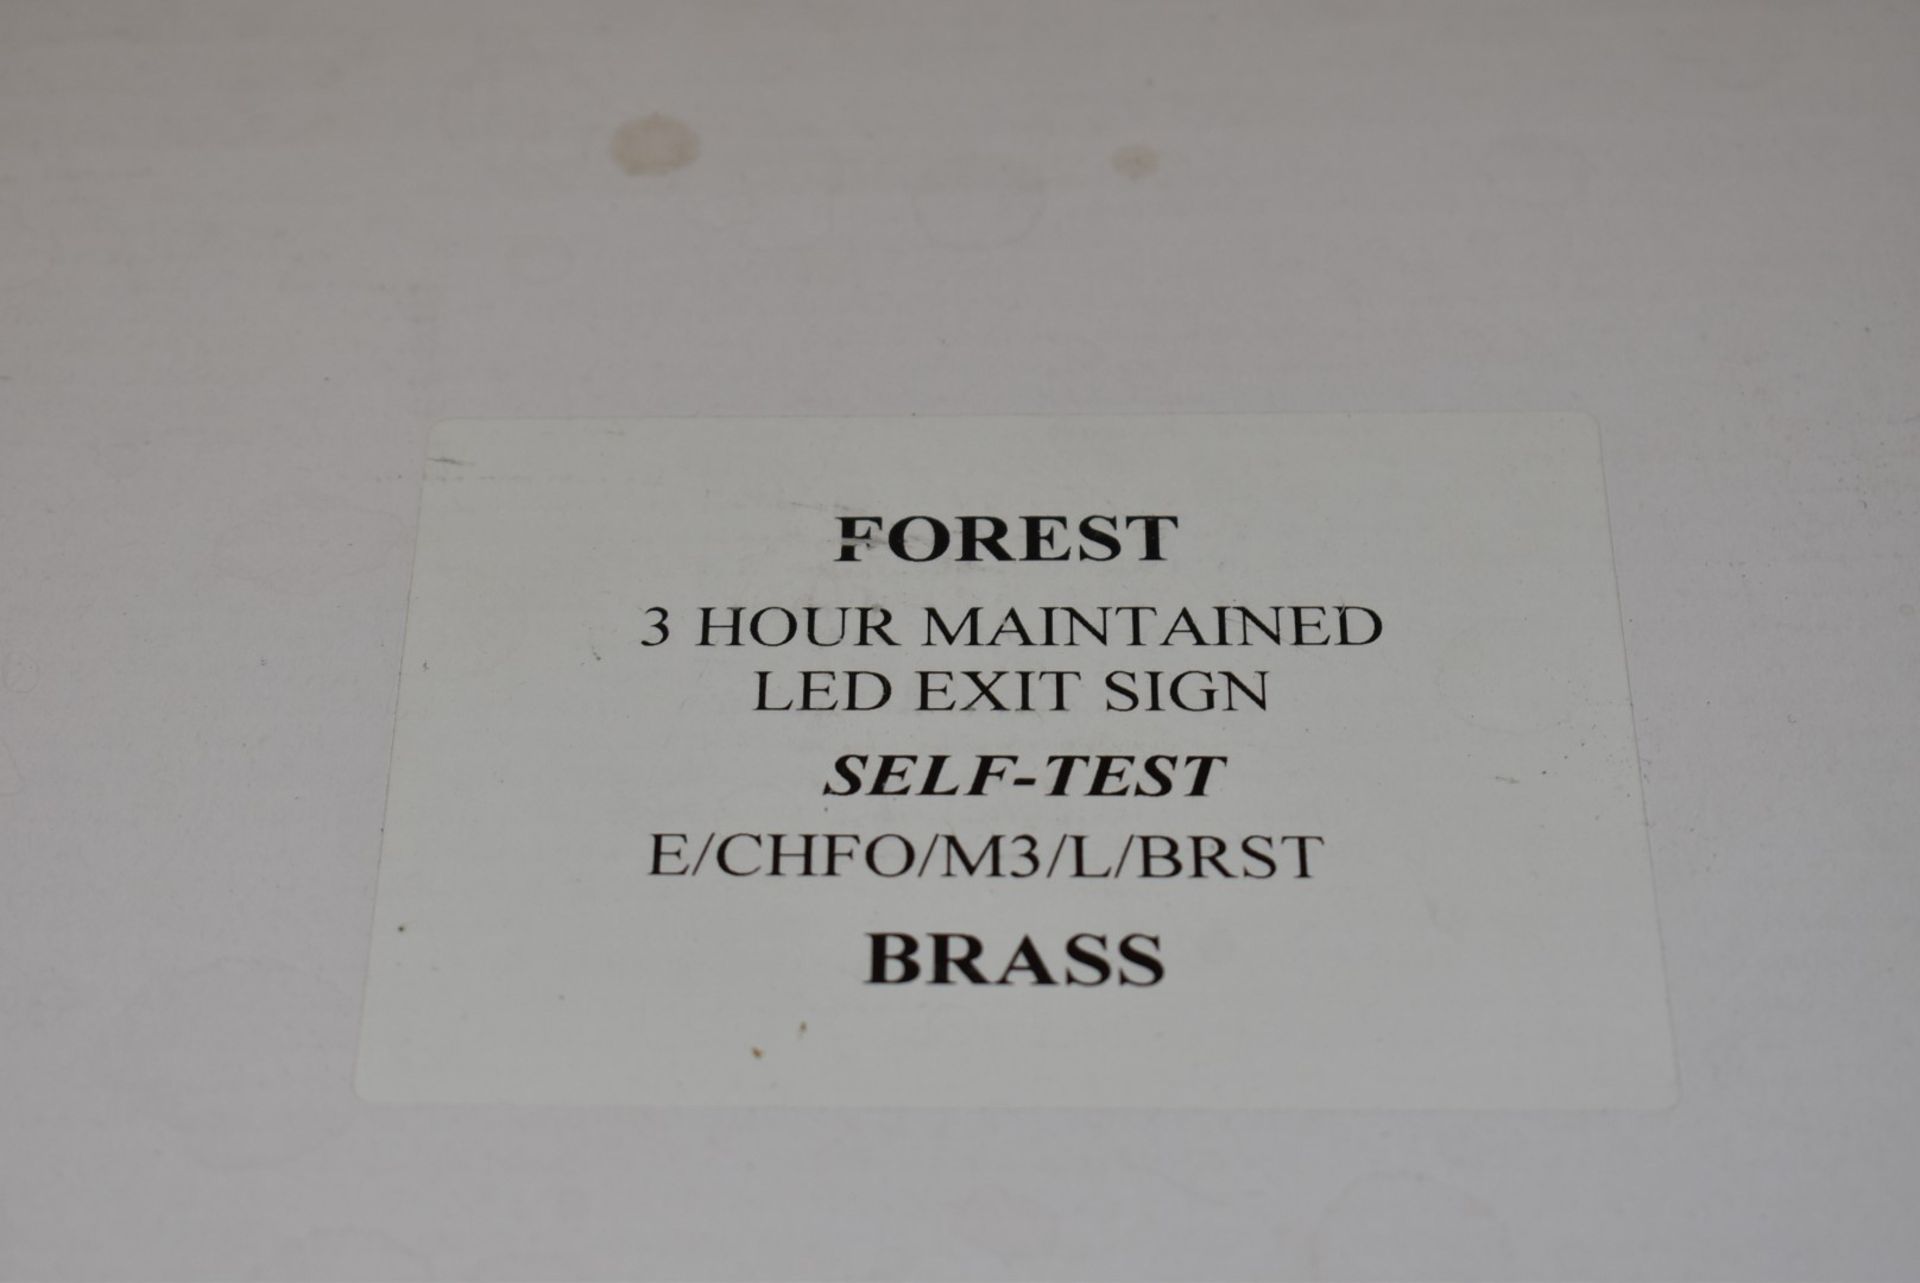 2 x Illuminated Fire Escape Signs With Brass Ceiling Fixtures - New and Unused - Image 4 of 4